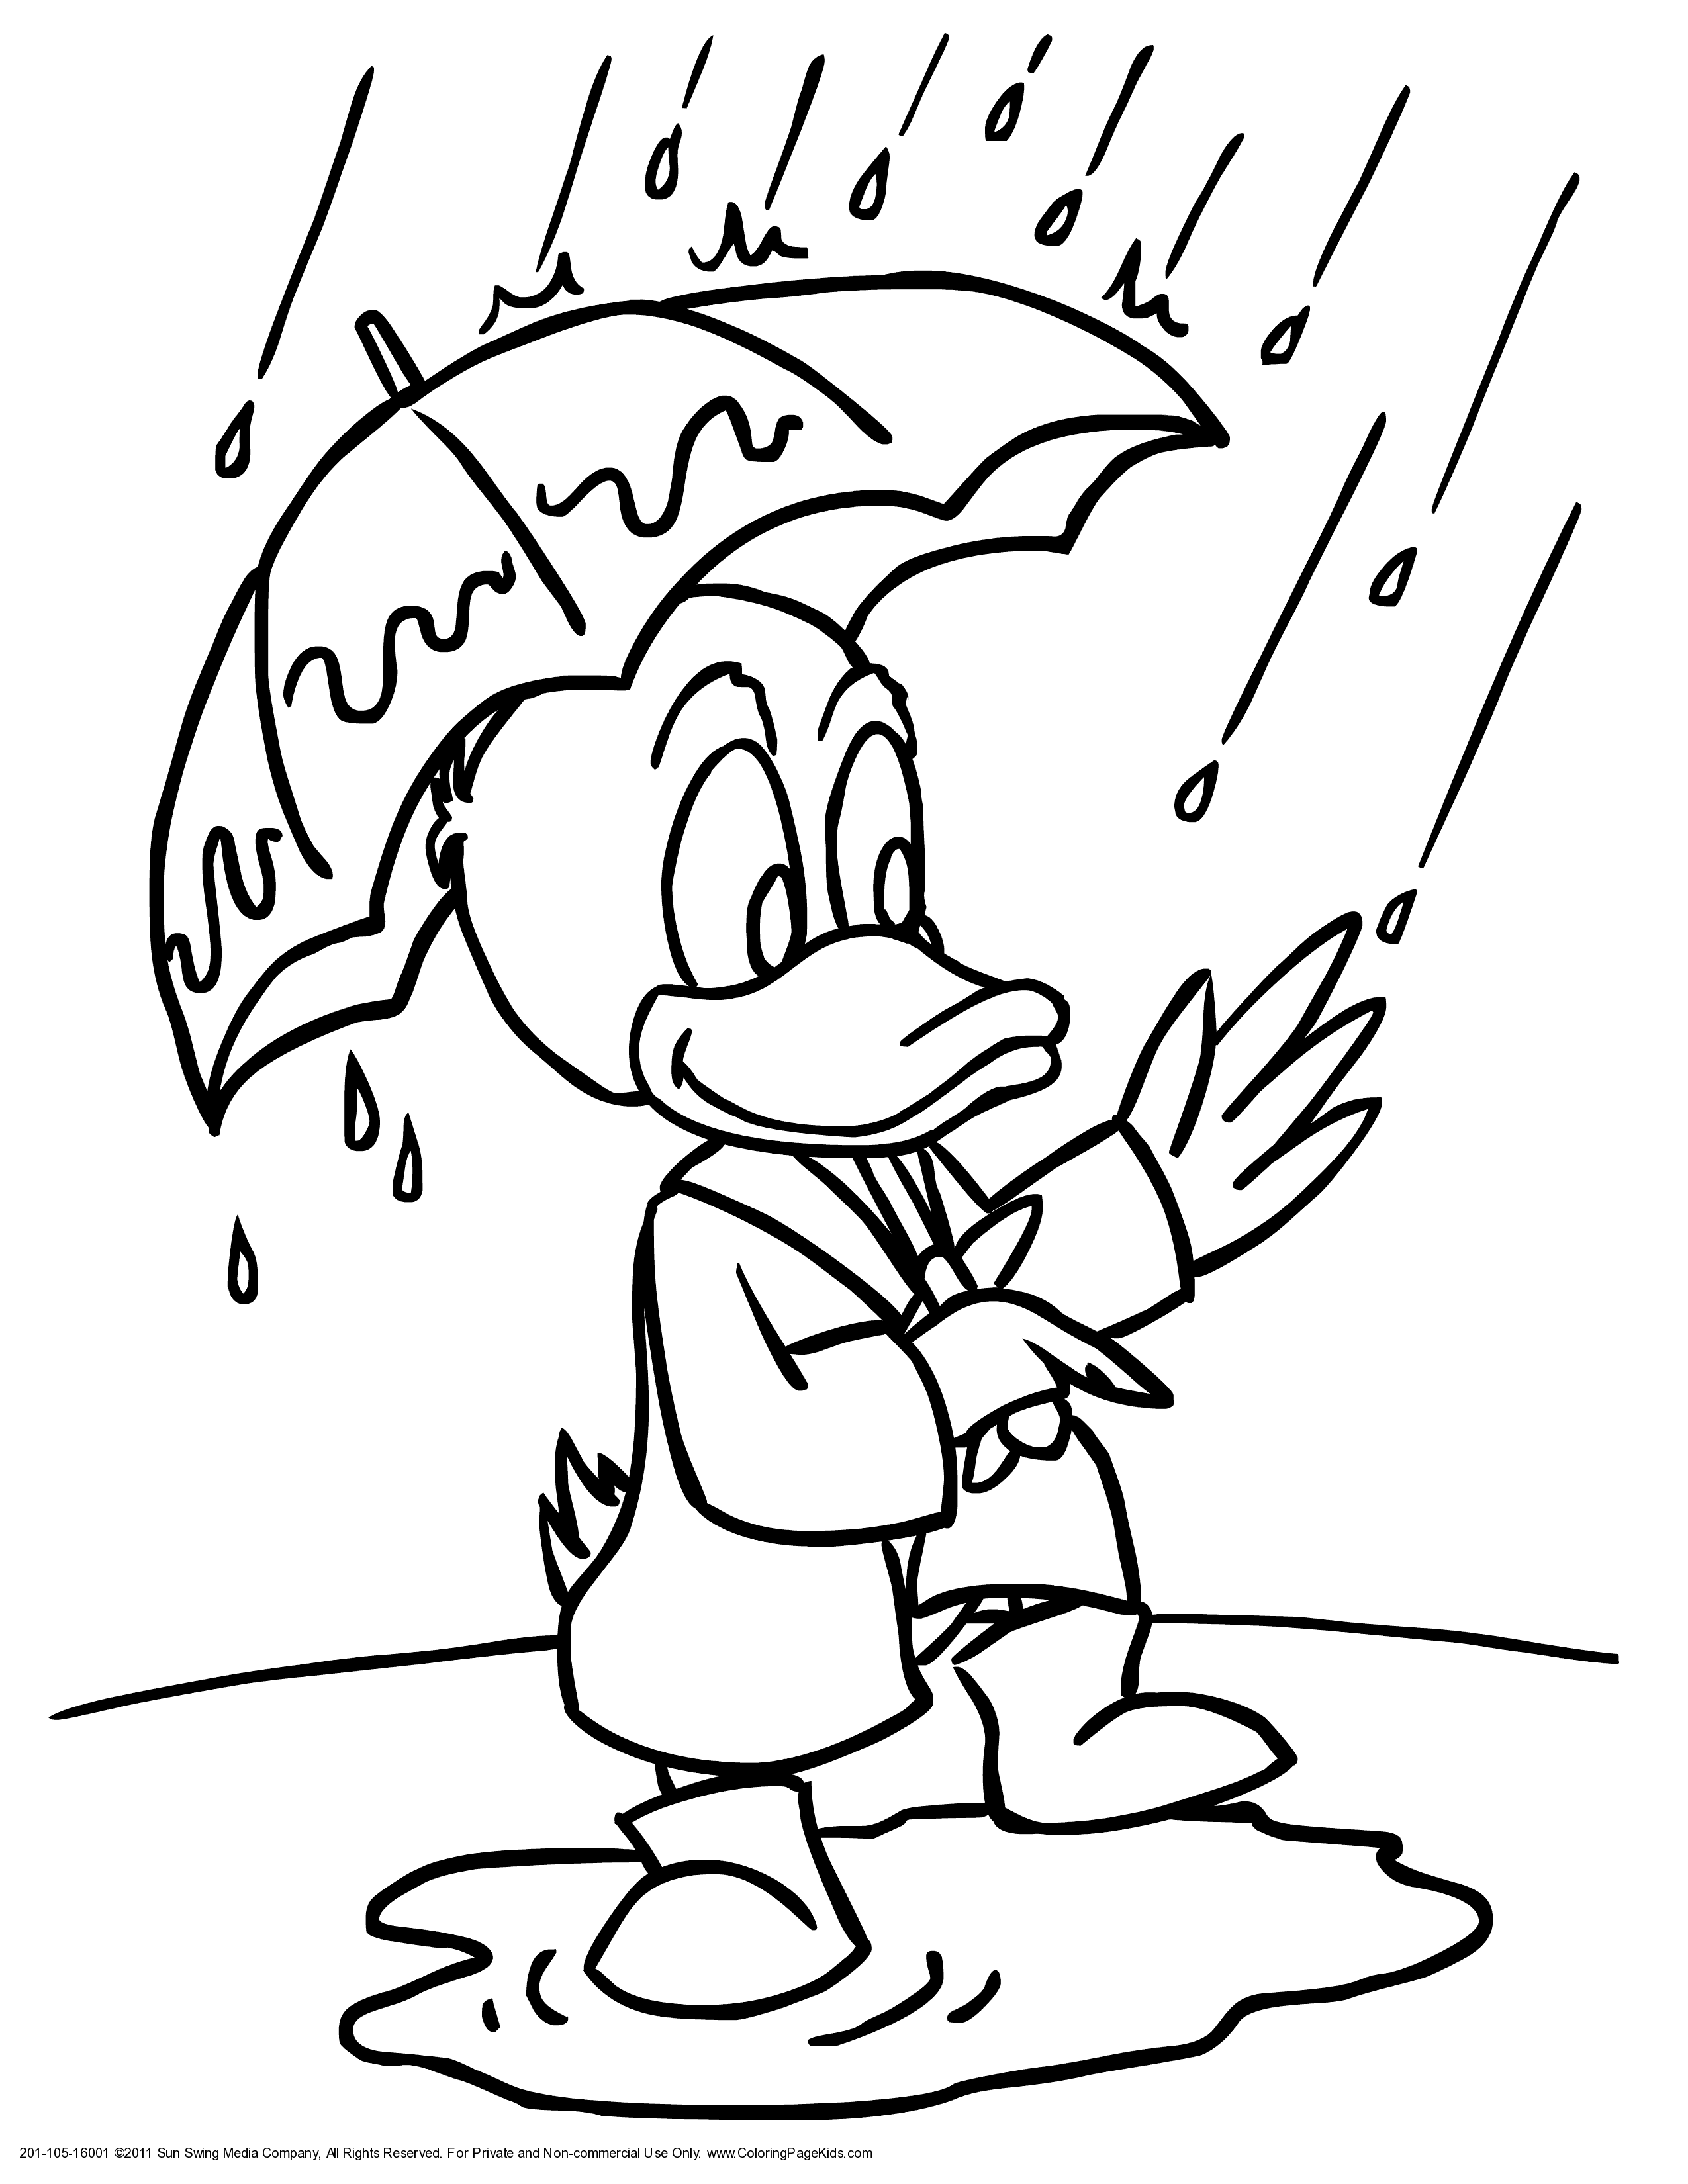 Puddle Duck With Umbrella Coloring Page